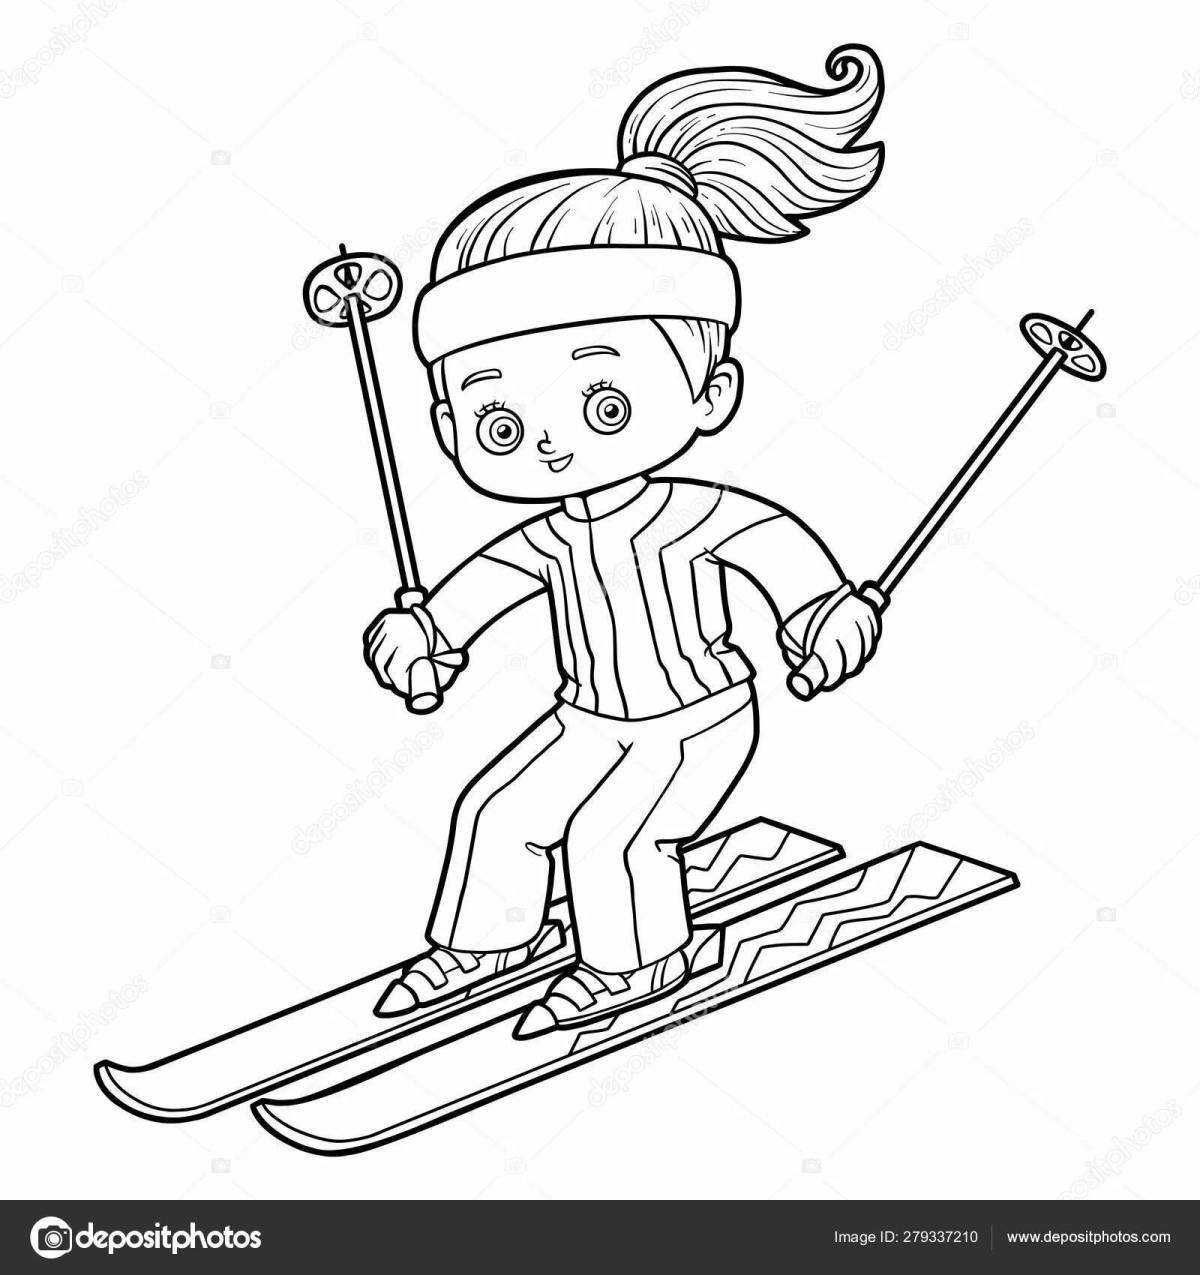 Animated skis for children 3-4 years old